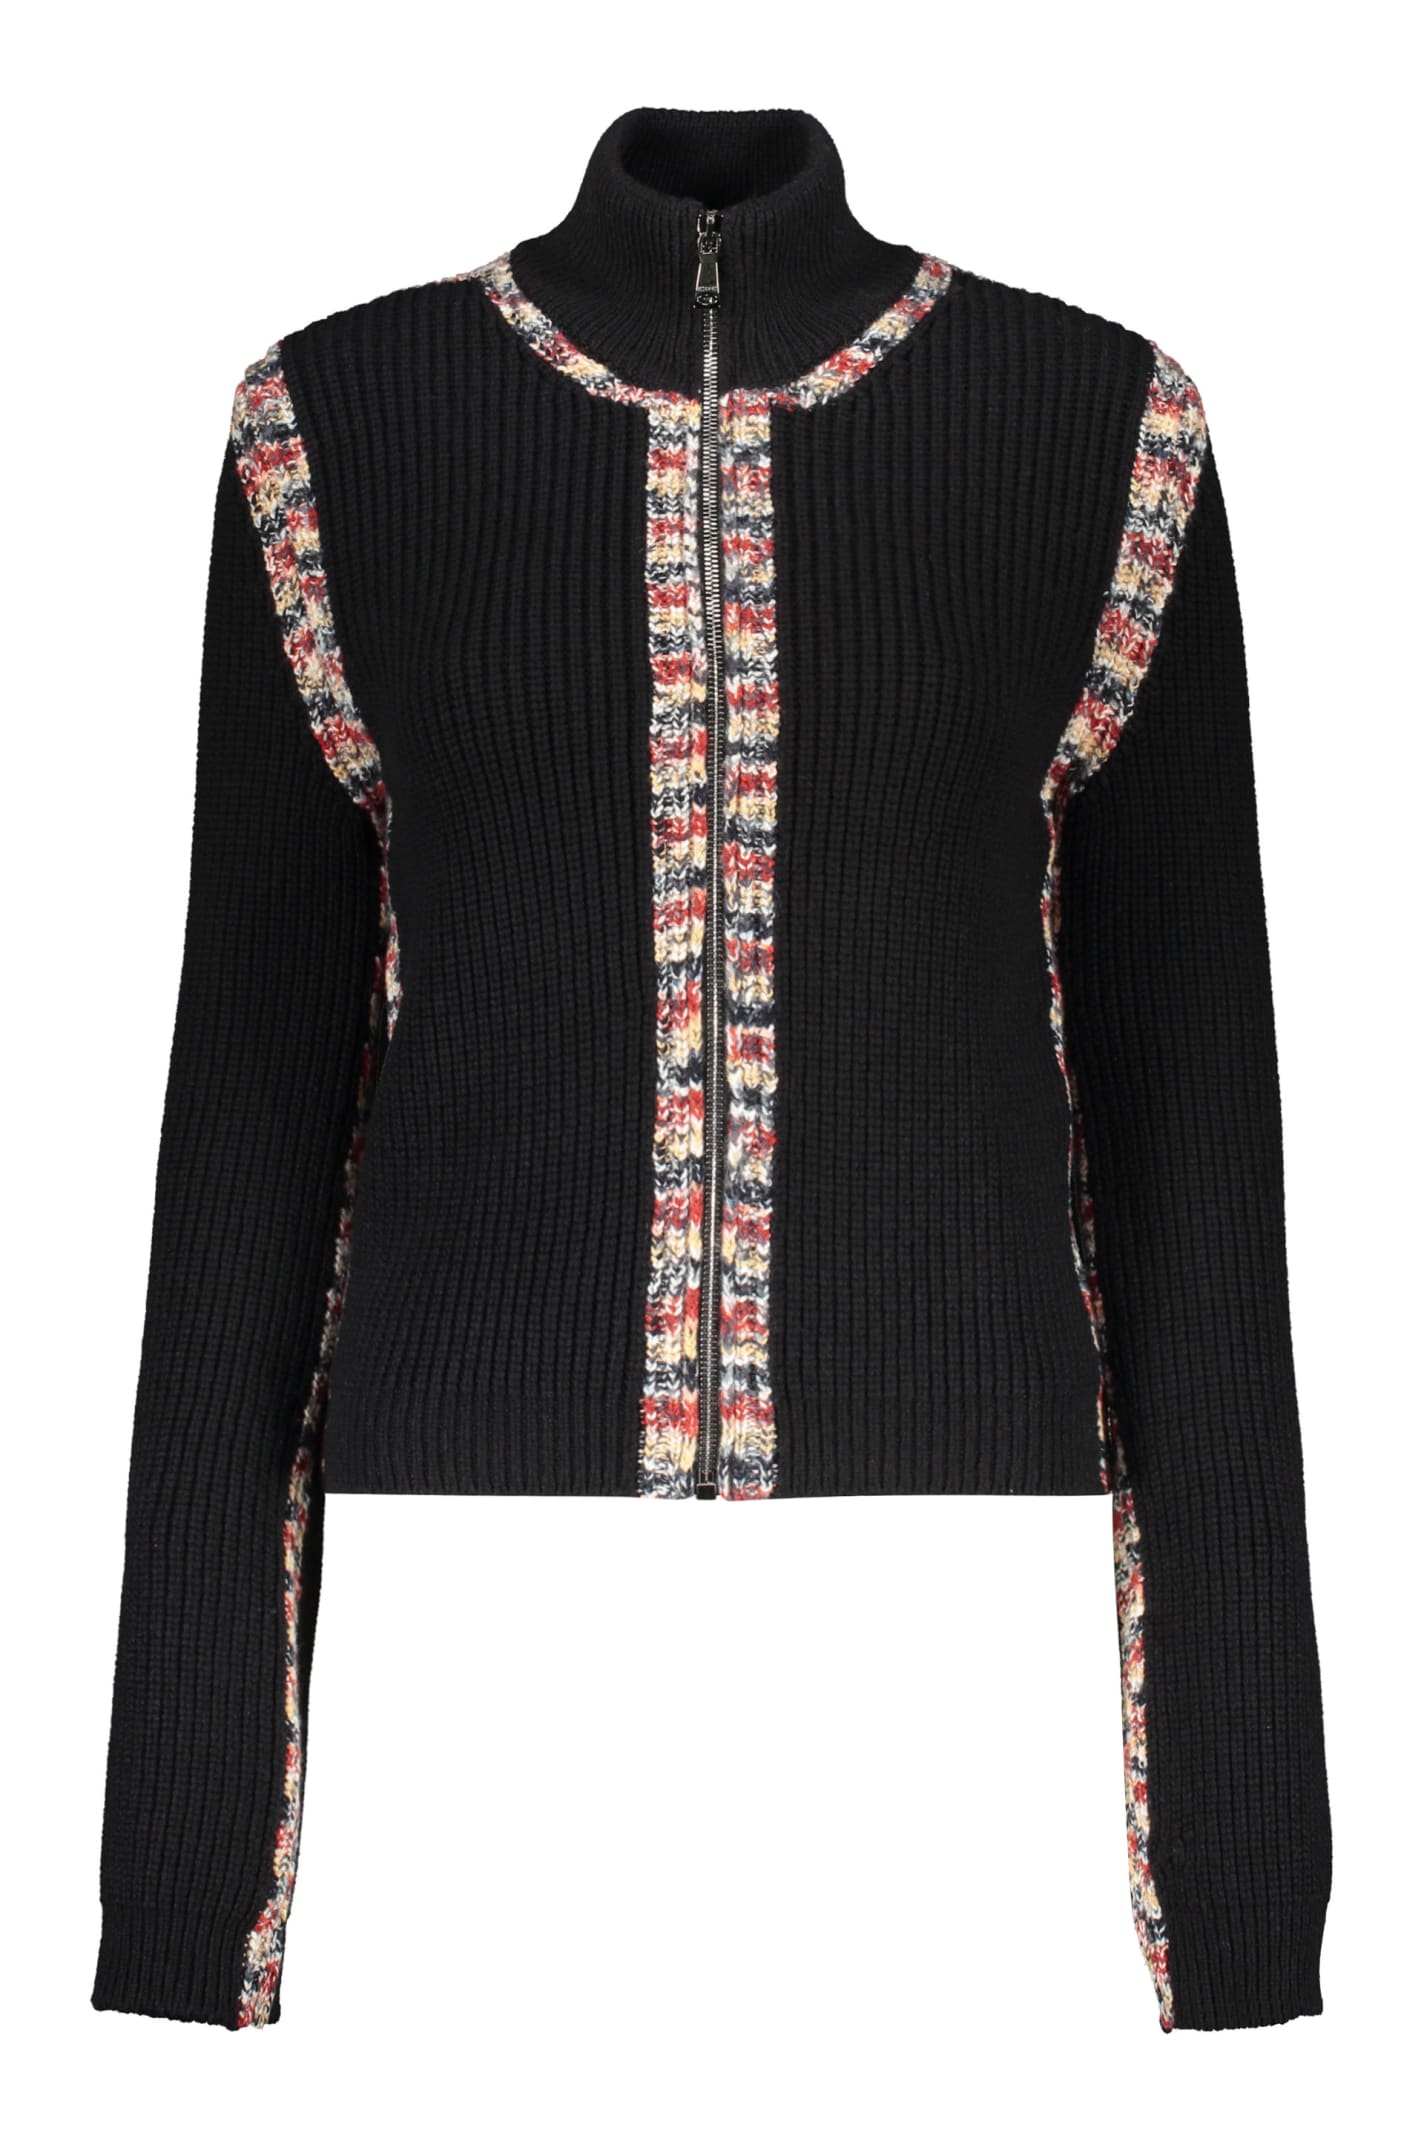 Missoni Wool Stand-up Collar Sweater In Black